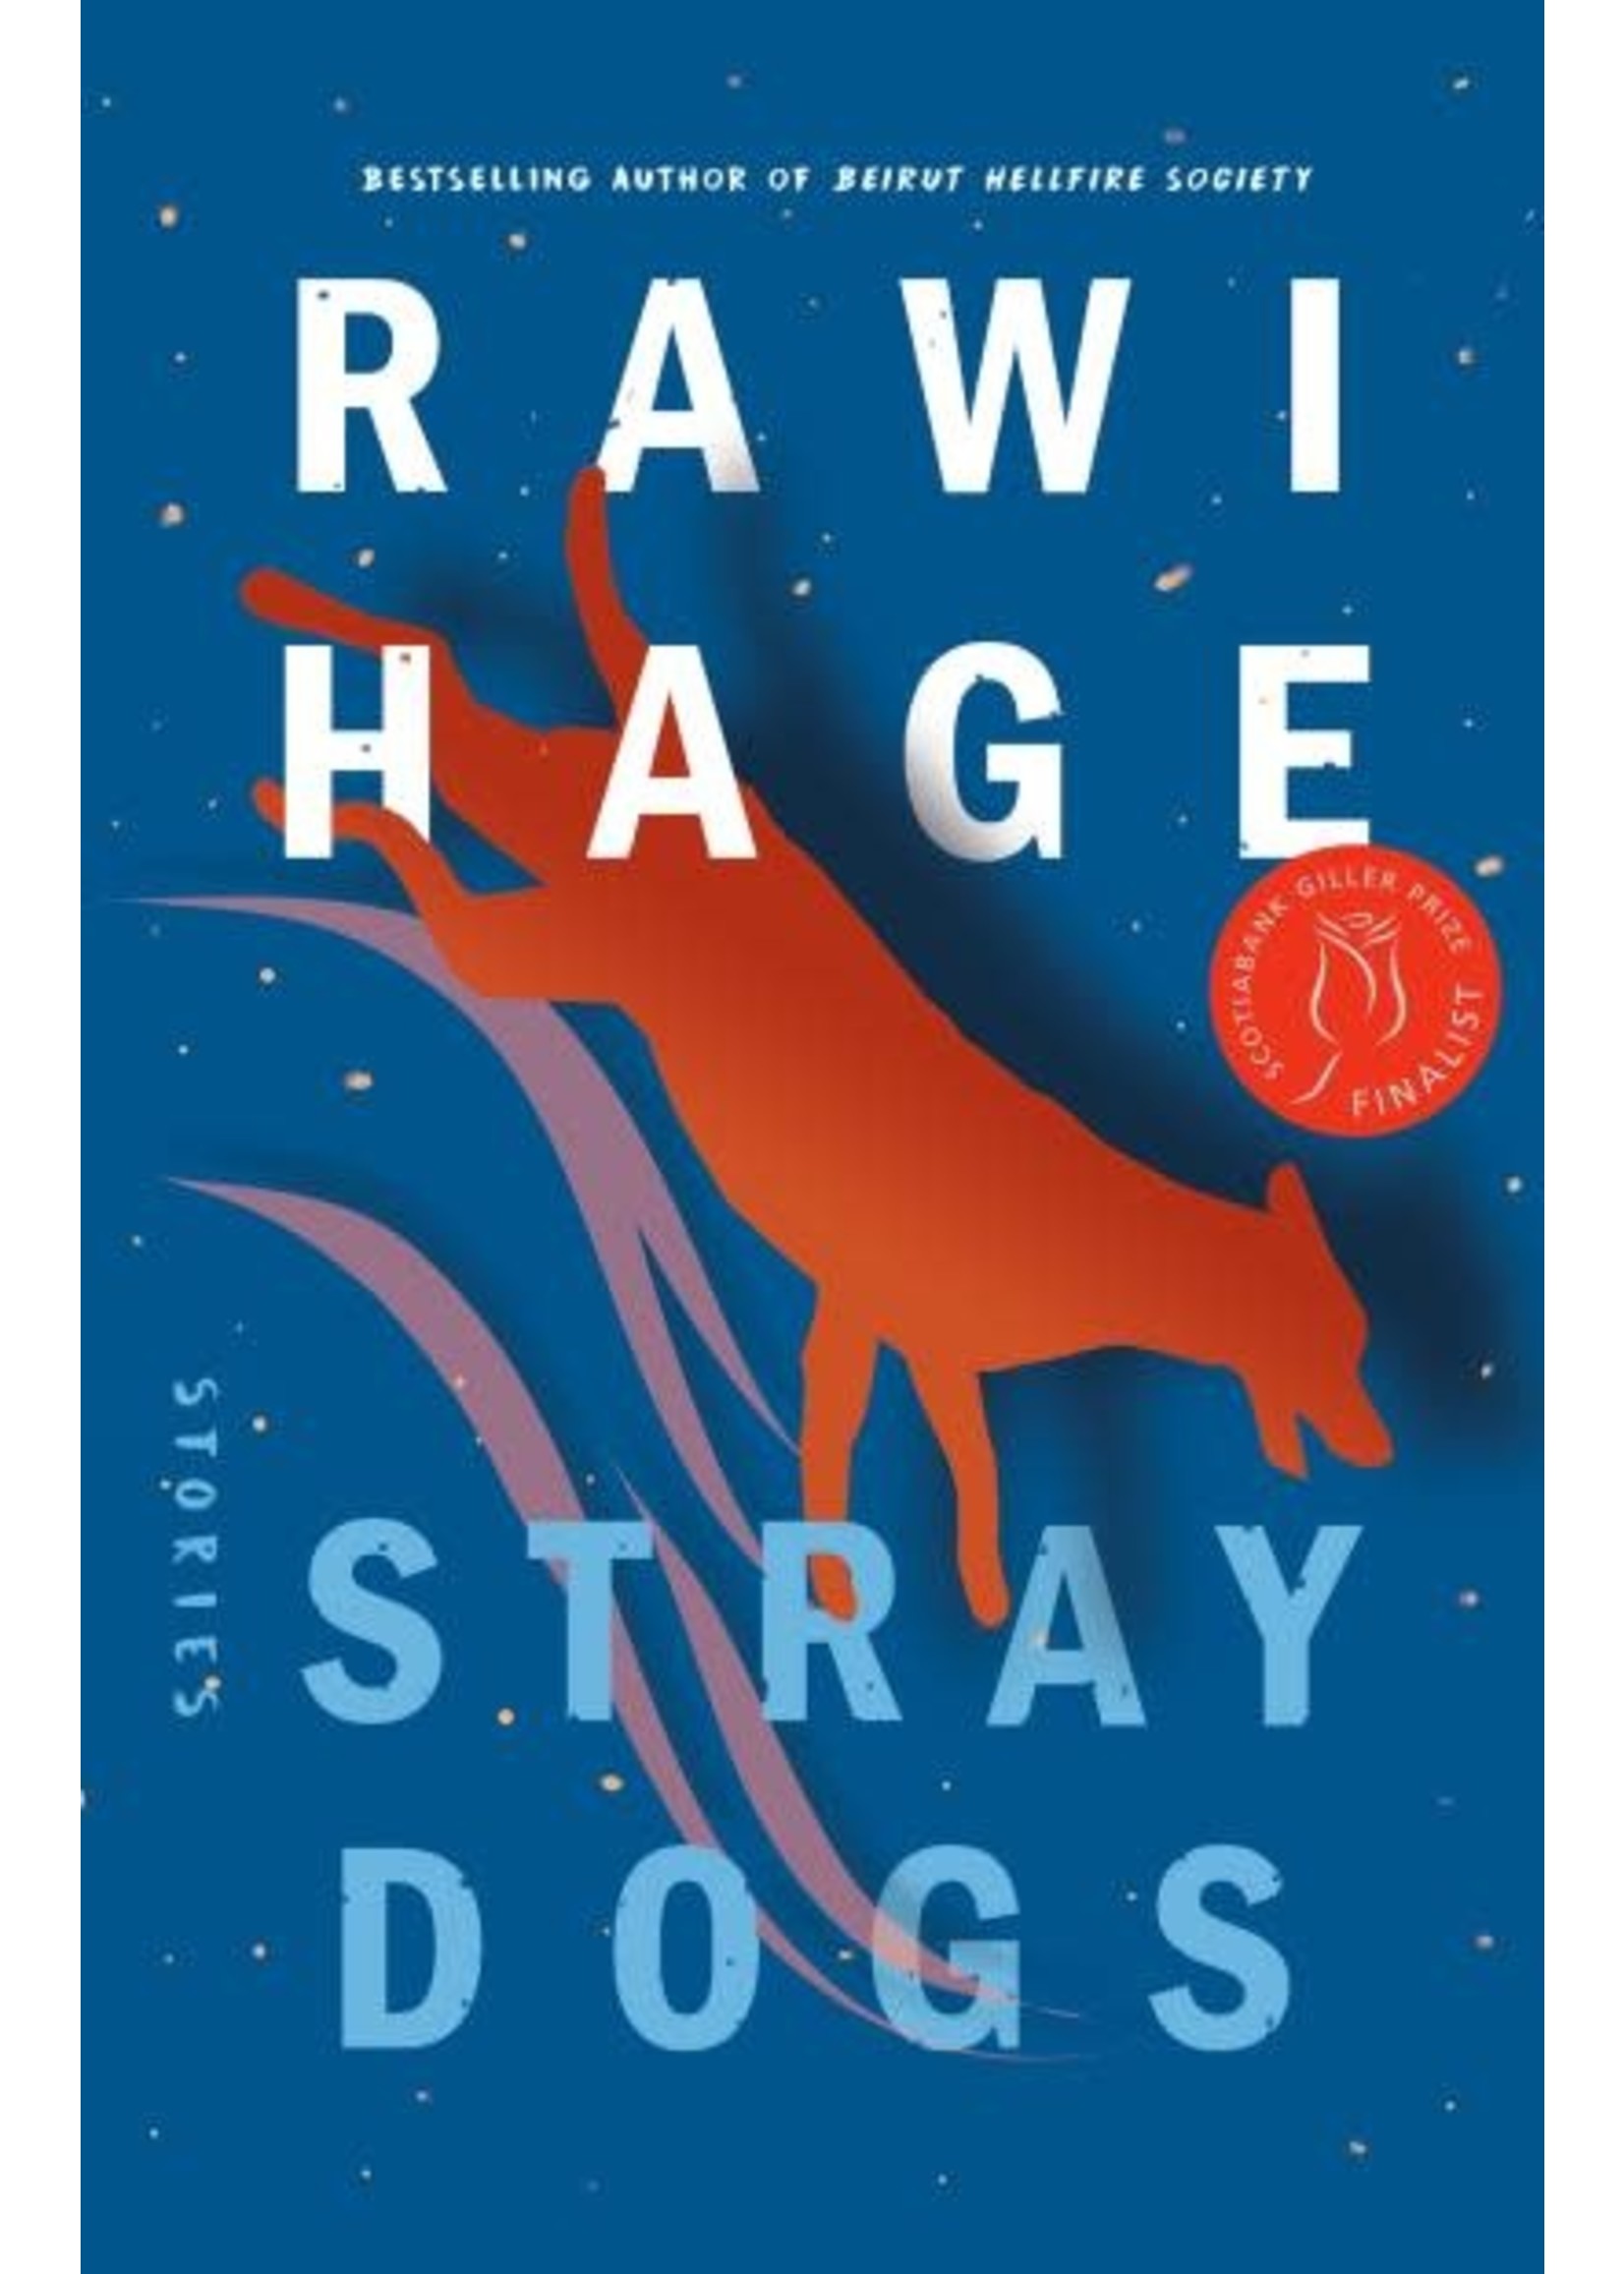 Stray Dogs And Other Stories by Rawi Hage